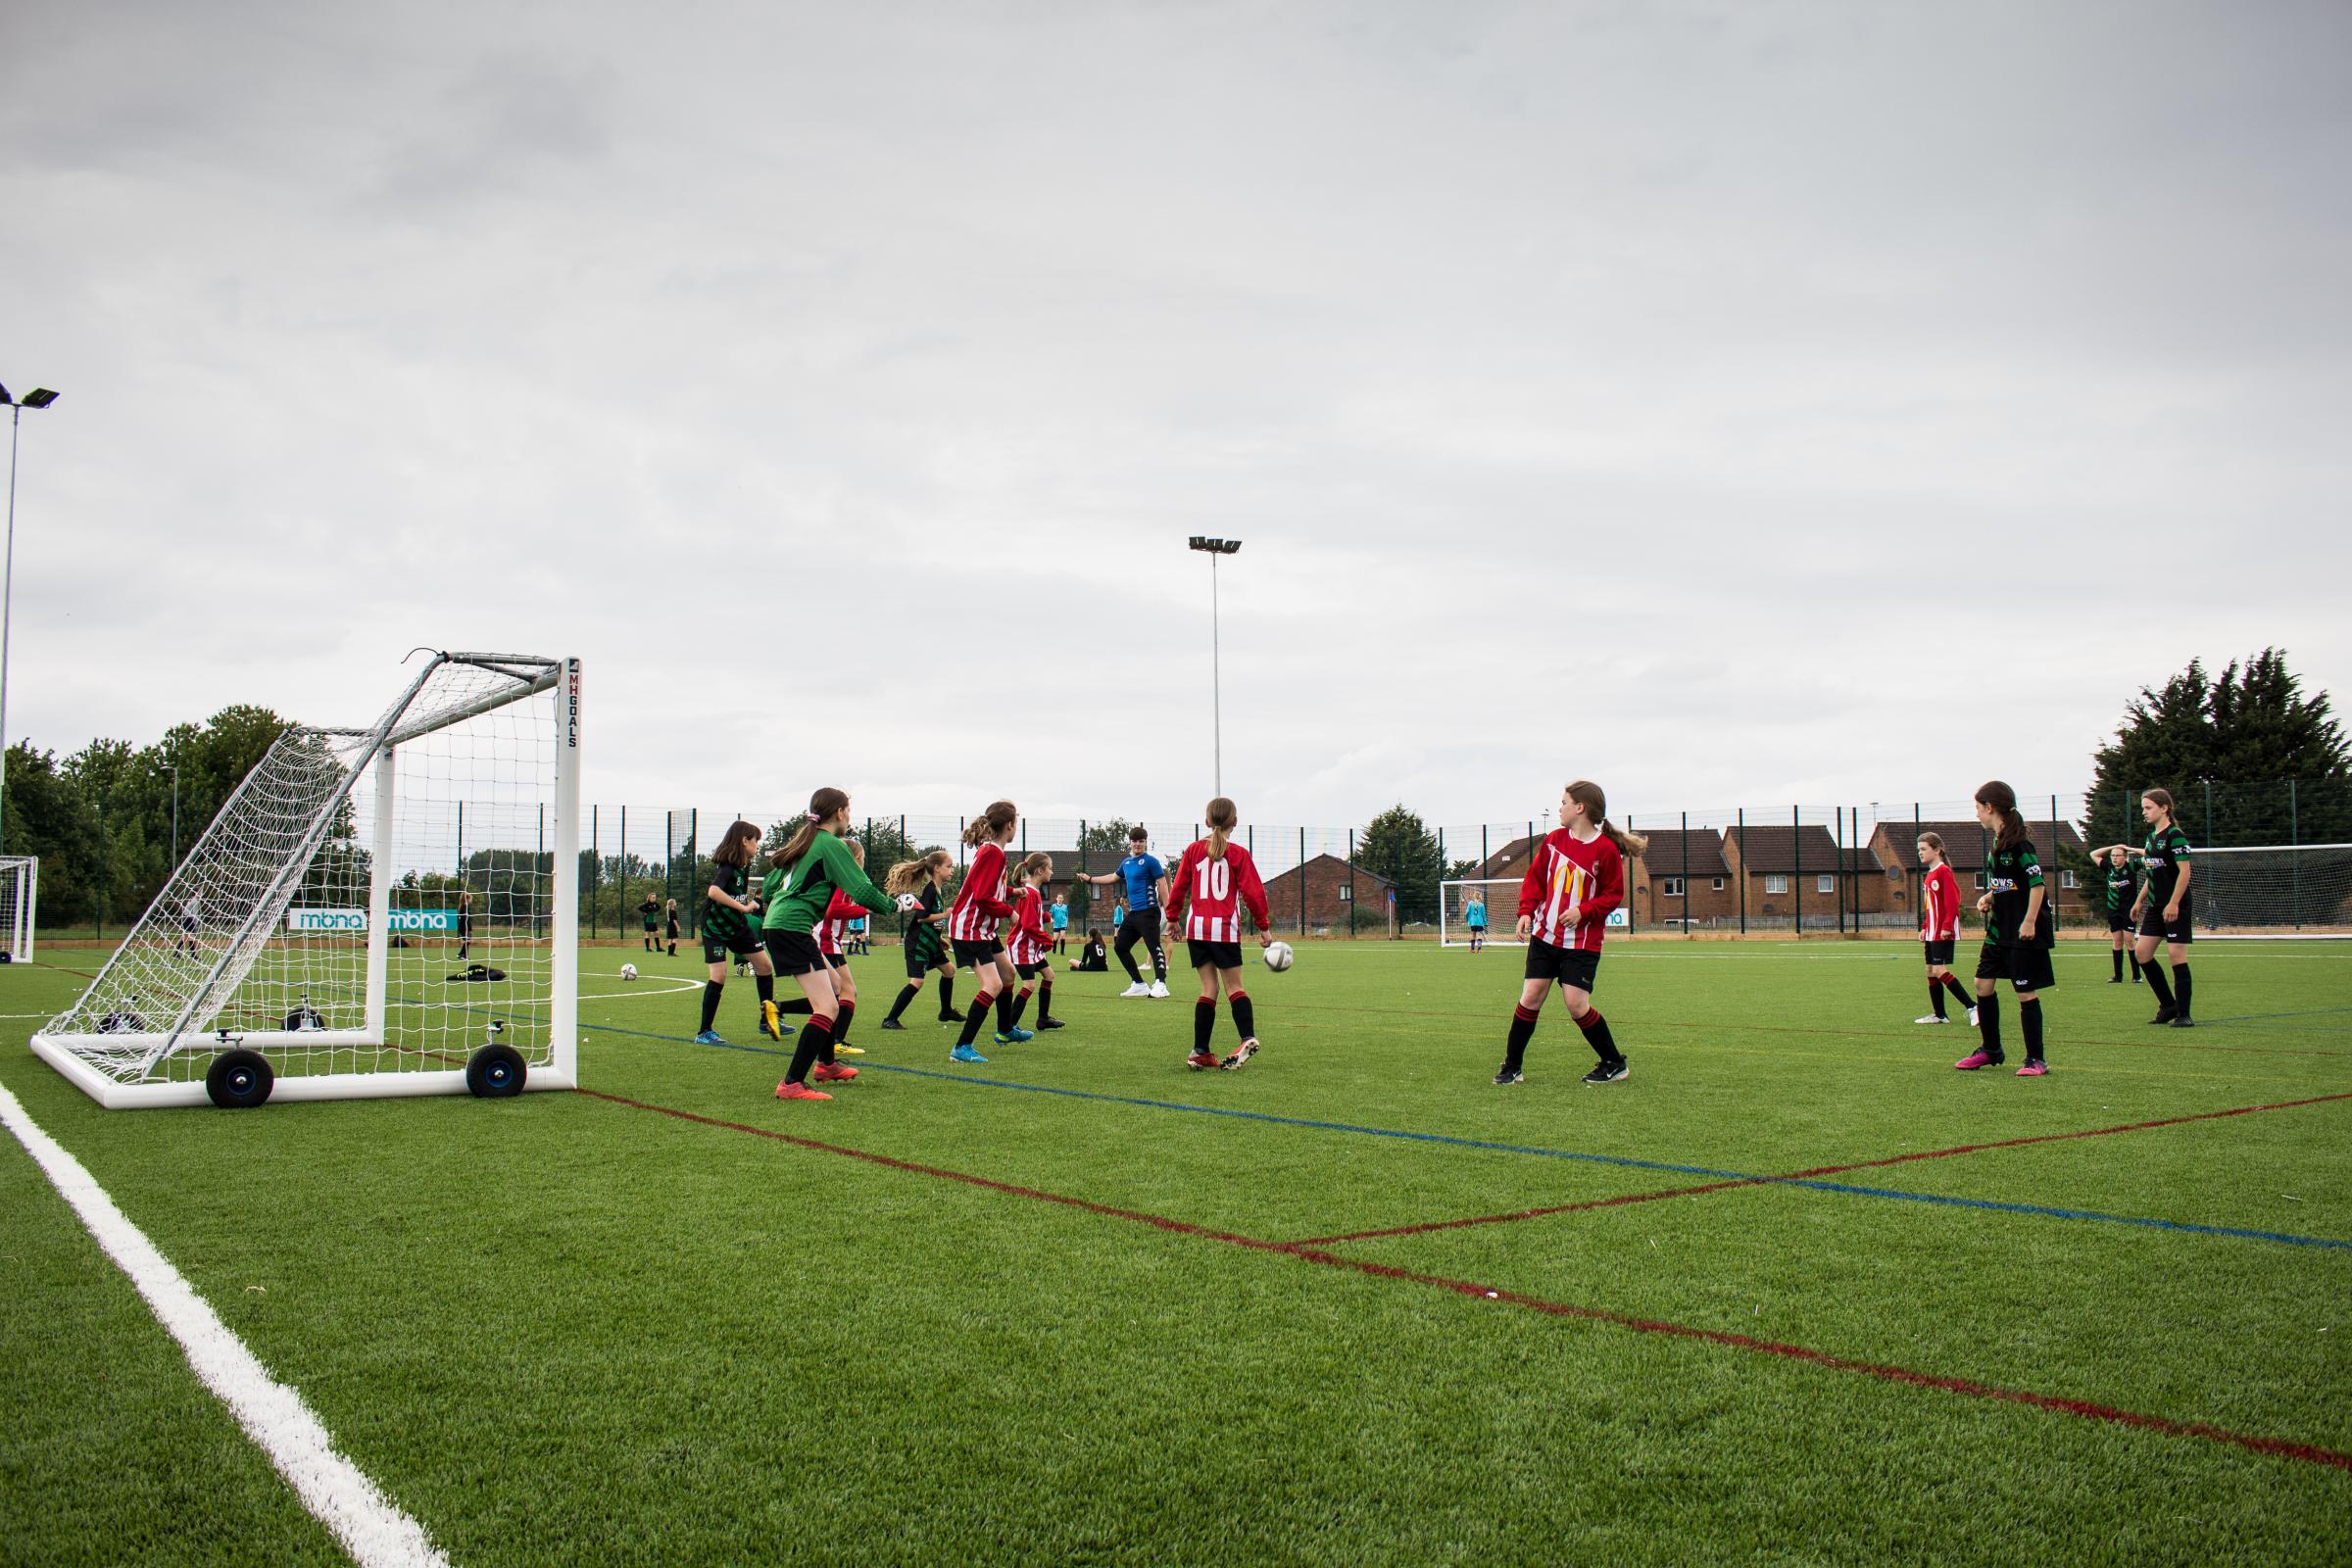 The official opening of the King George V sports hub saw children from eight Chester primary schools taking part in a girls&rsquo; football tournament on the new 3G pitch.